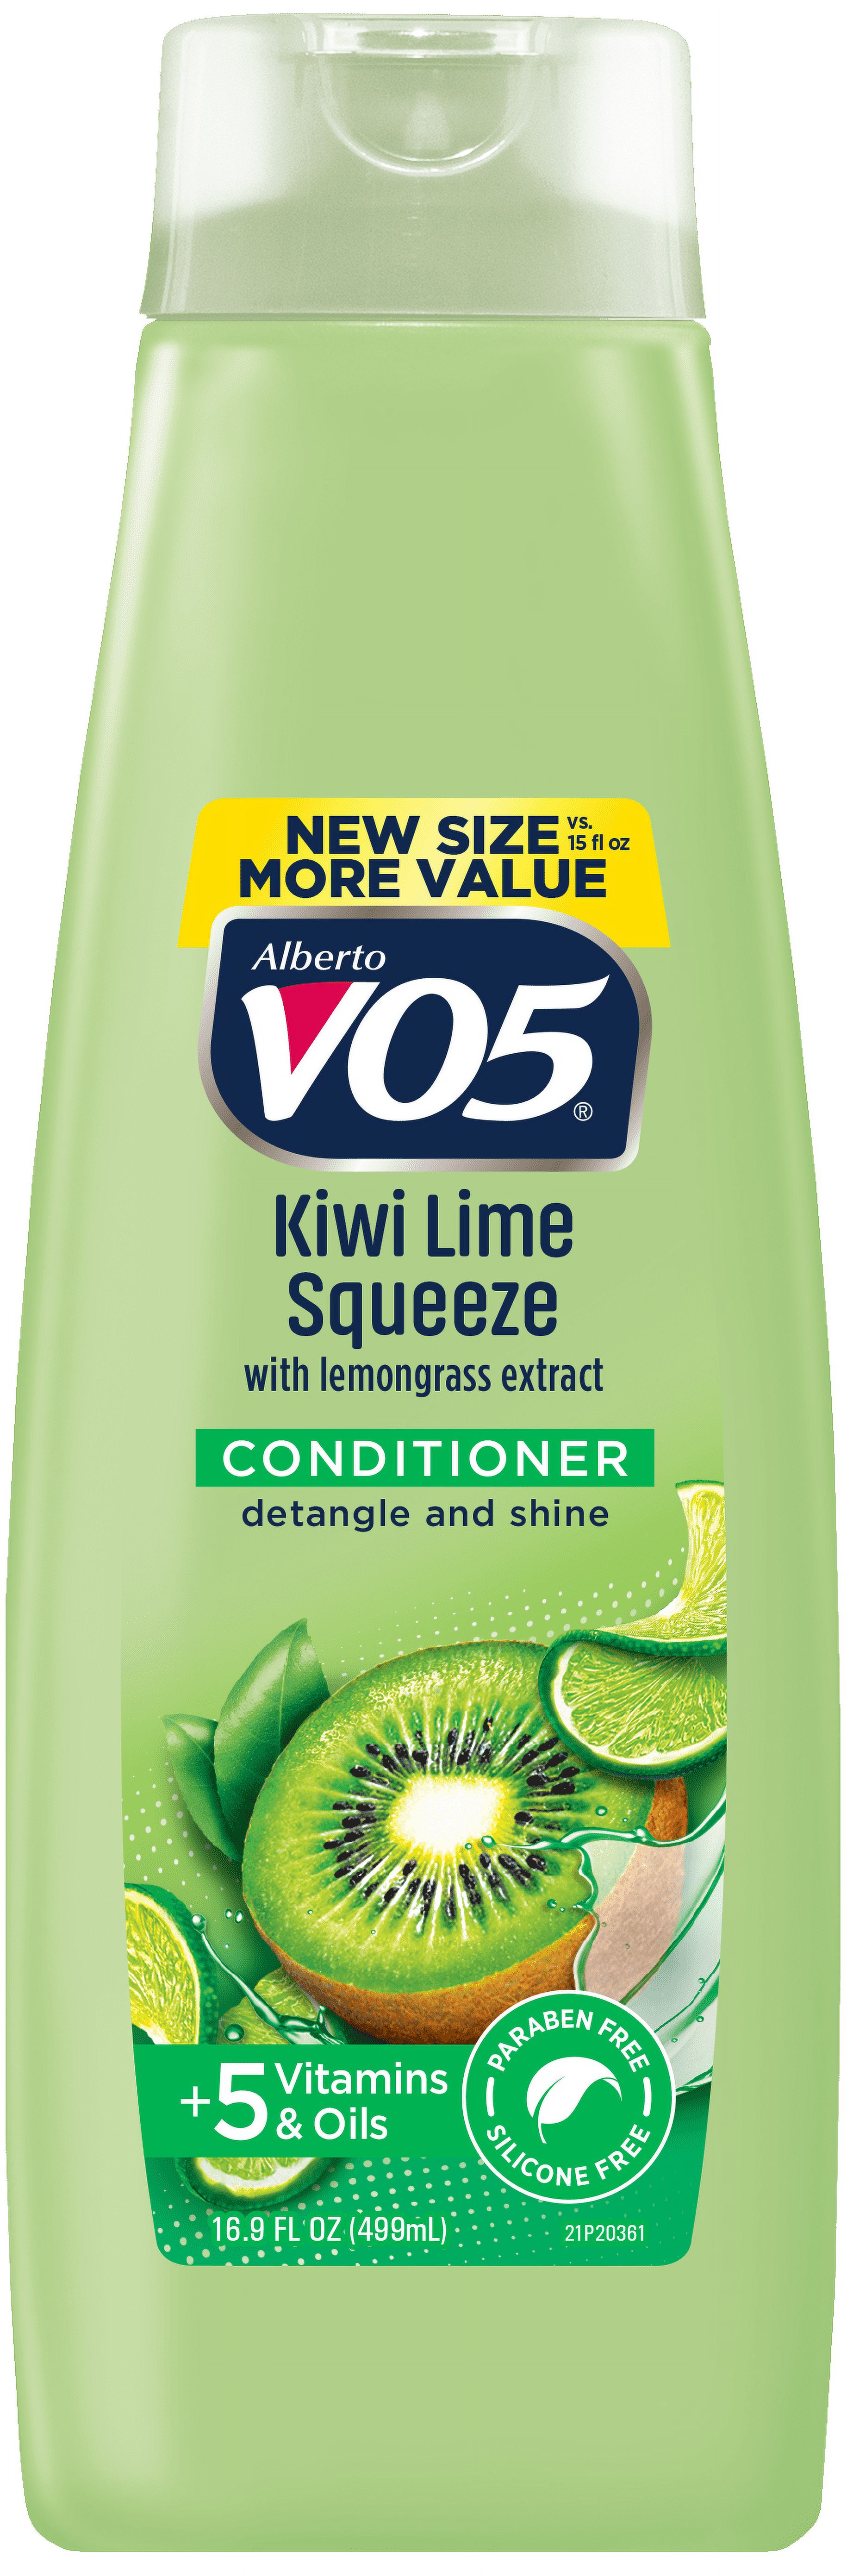 Alberto VO5 Kiwi Lime Squeeze Conditioner with Vitamin E & C, for All Hair Types, 16.9 fl oz - image 1 of 6